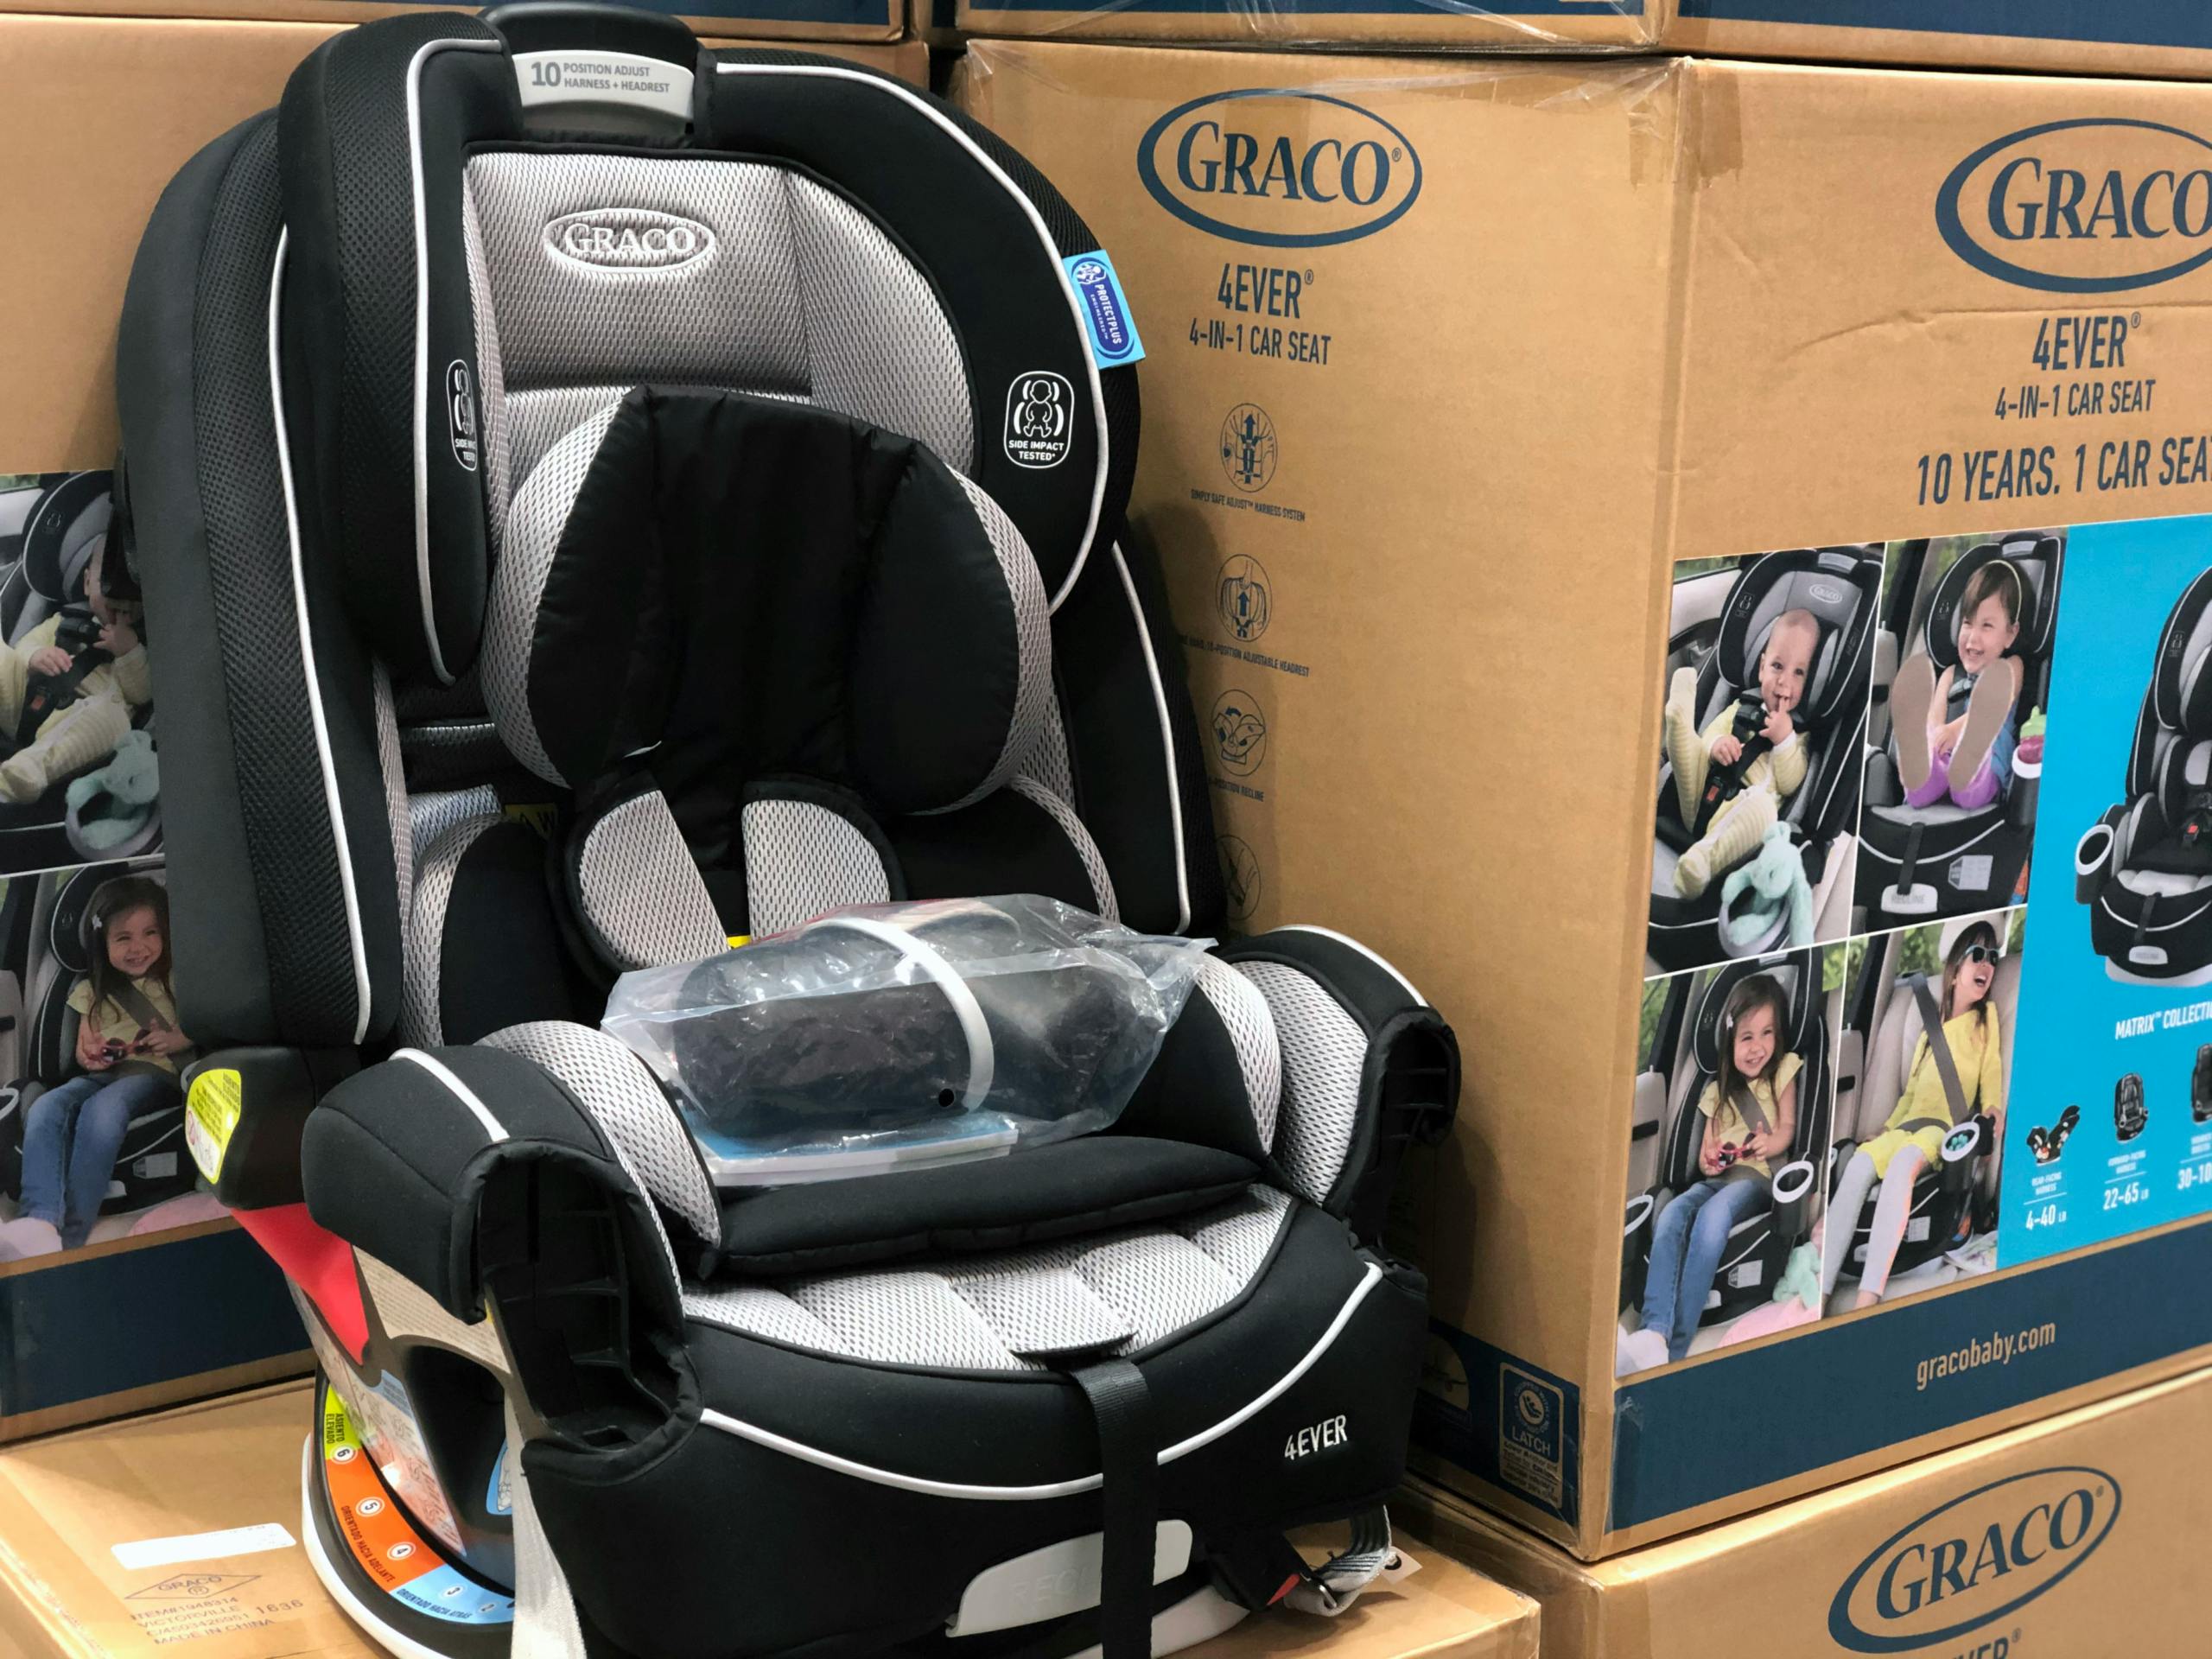 Customer Reviews of Costco Graco Car Seat{null}